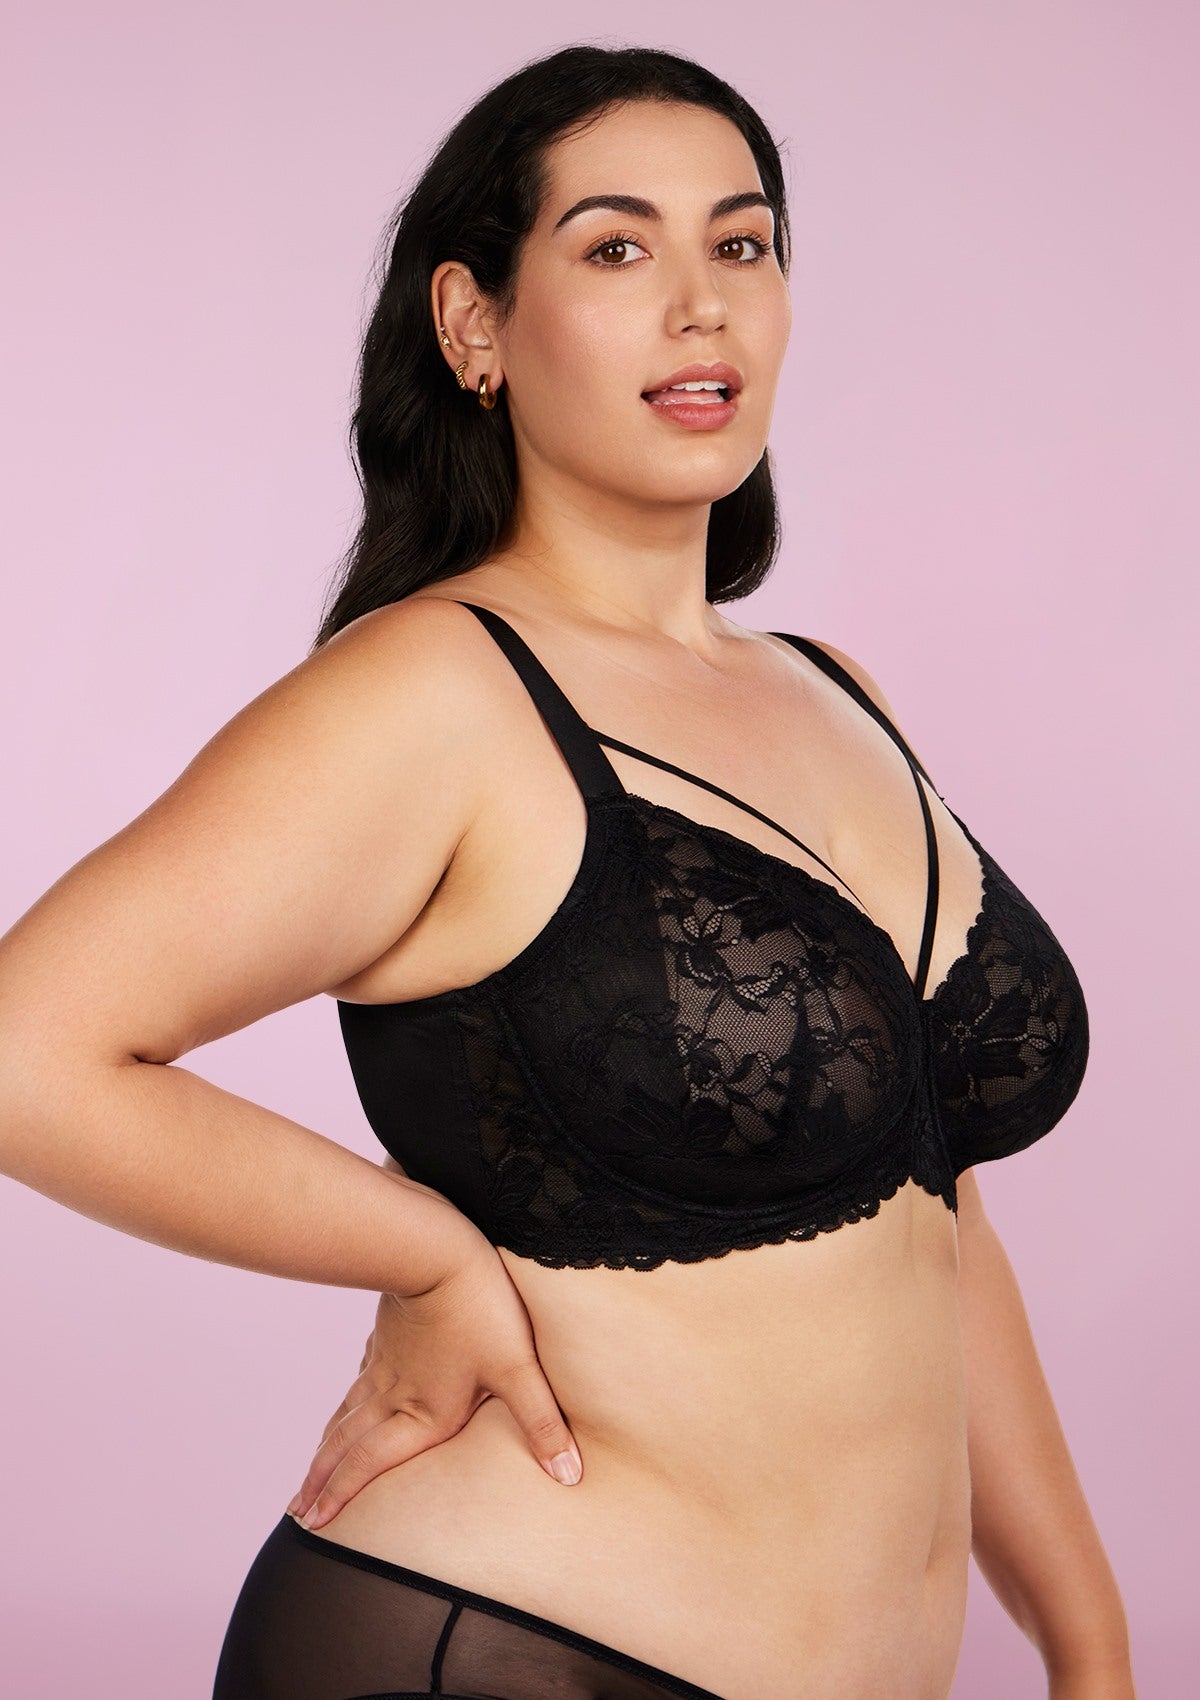 HSIA Pretty In Petals Lace Bra And Panty Set: Non Padded Wired Bra - Black / 40 / DDD/F